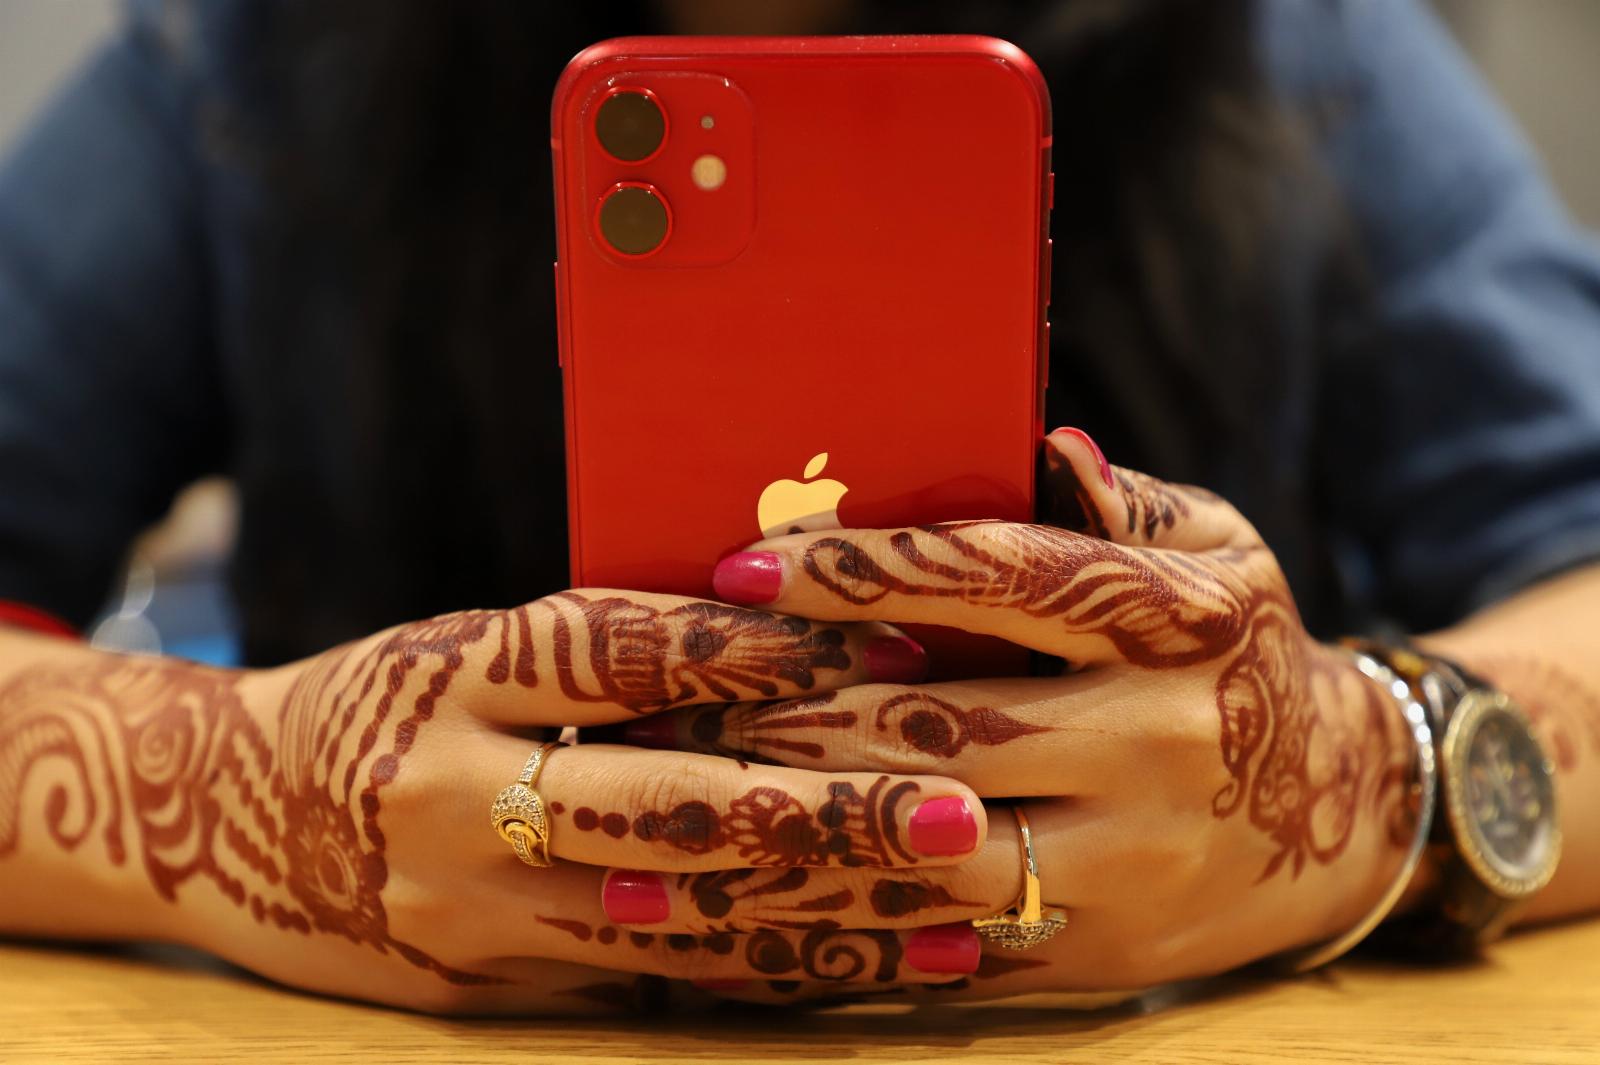 Shipments of iPhones made in India surged 162% in value terms